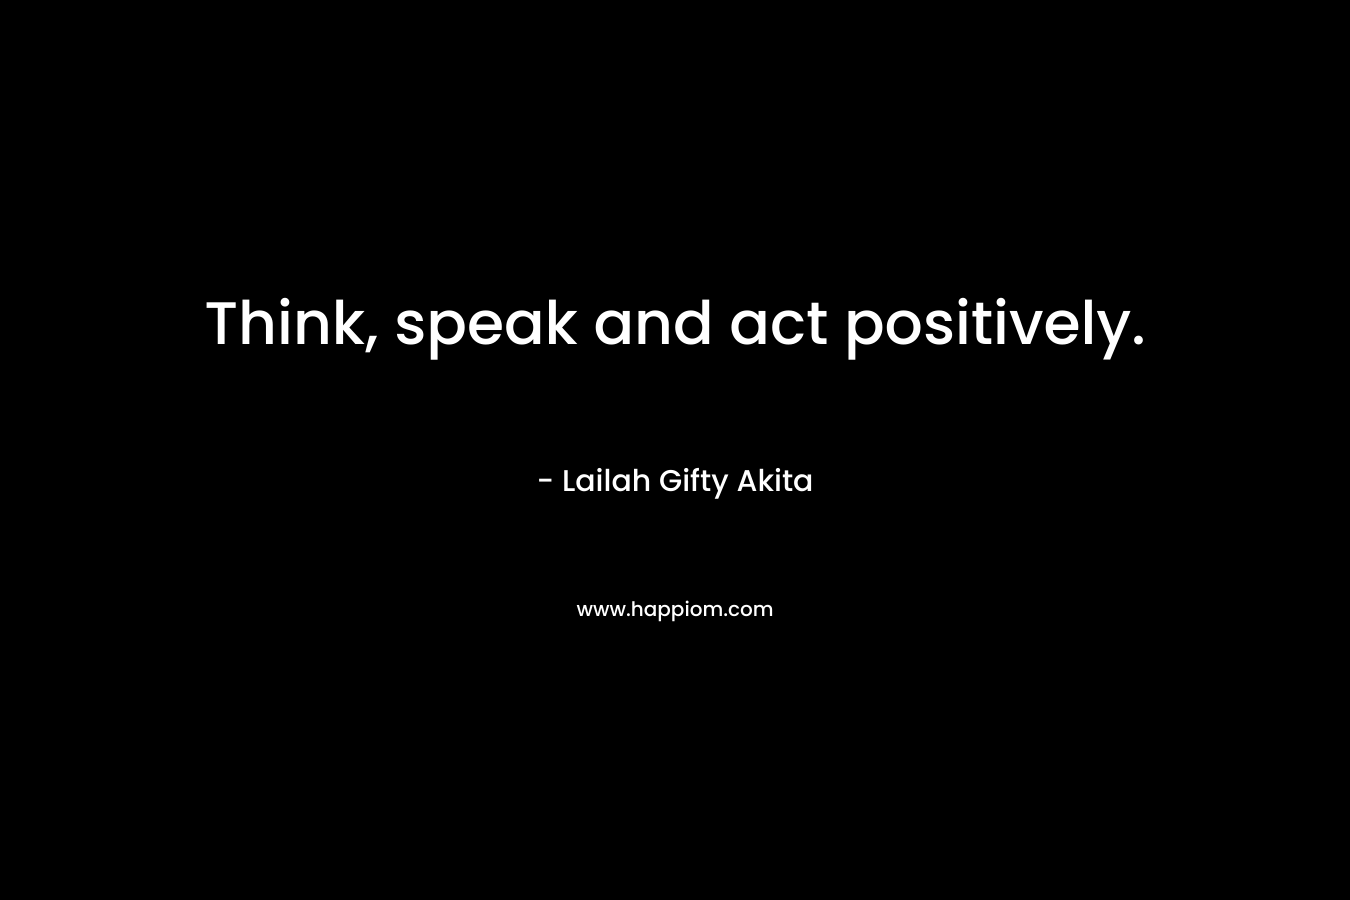 Think, speak and act positively.